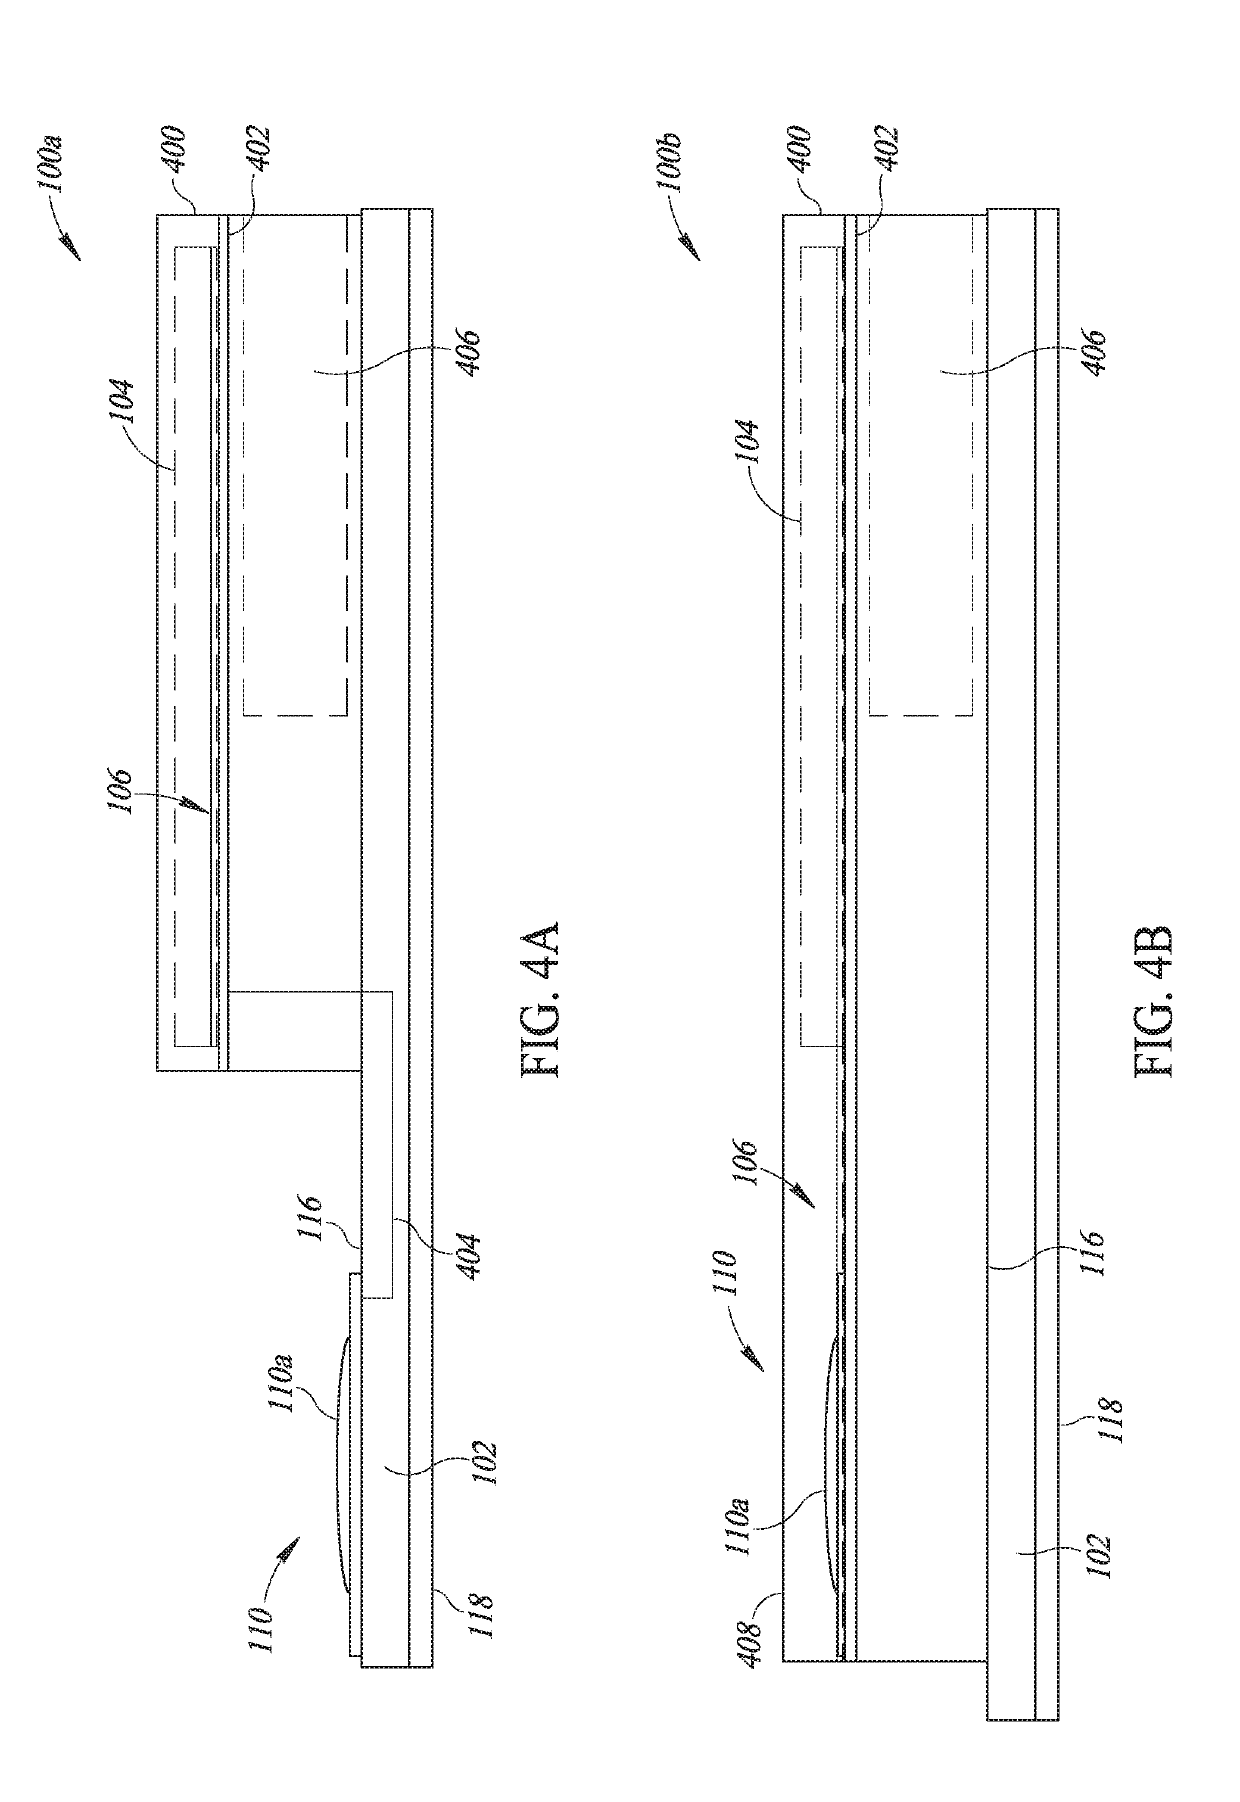 Systems and methods for providing displays via a smart hand-strap accessory